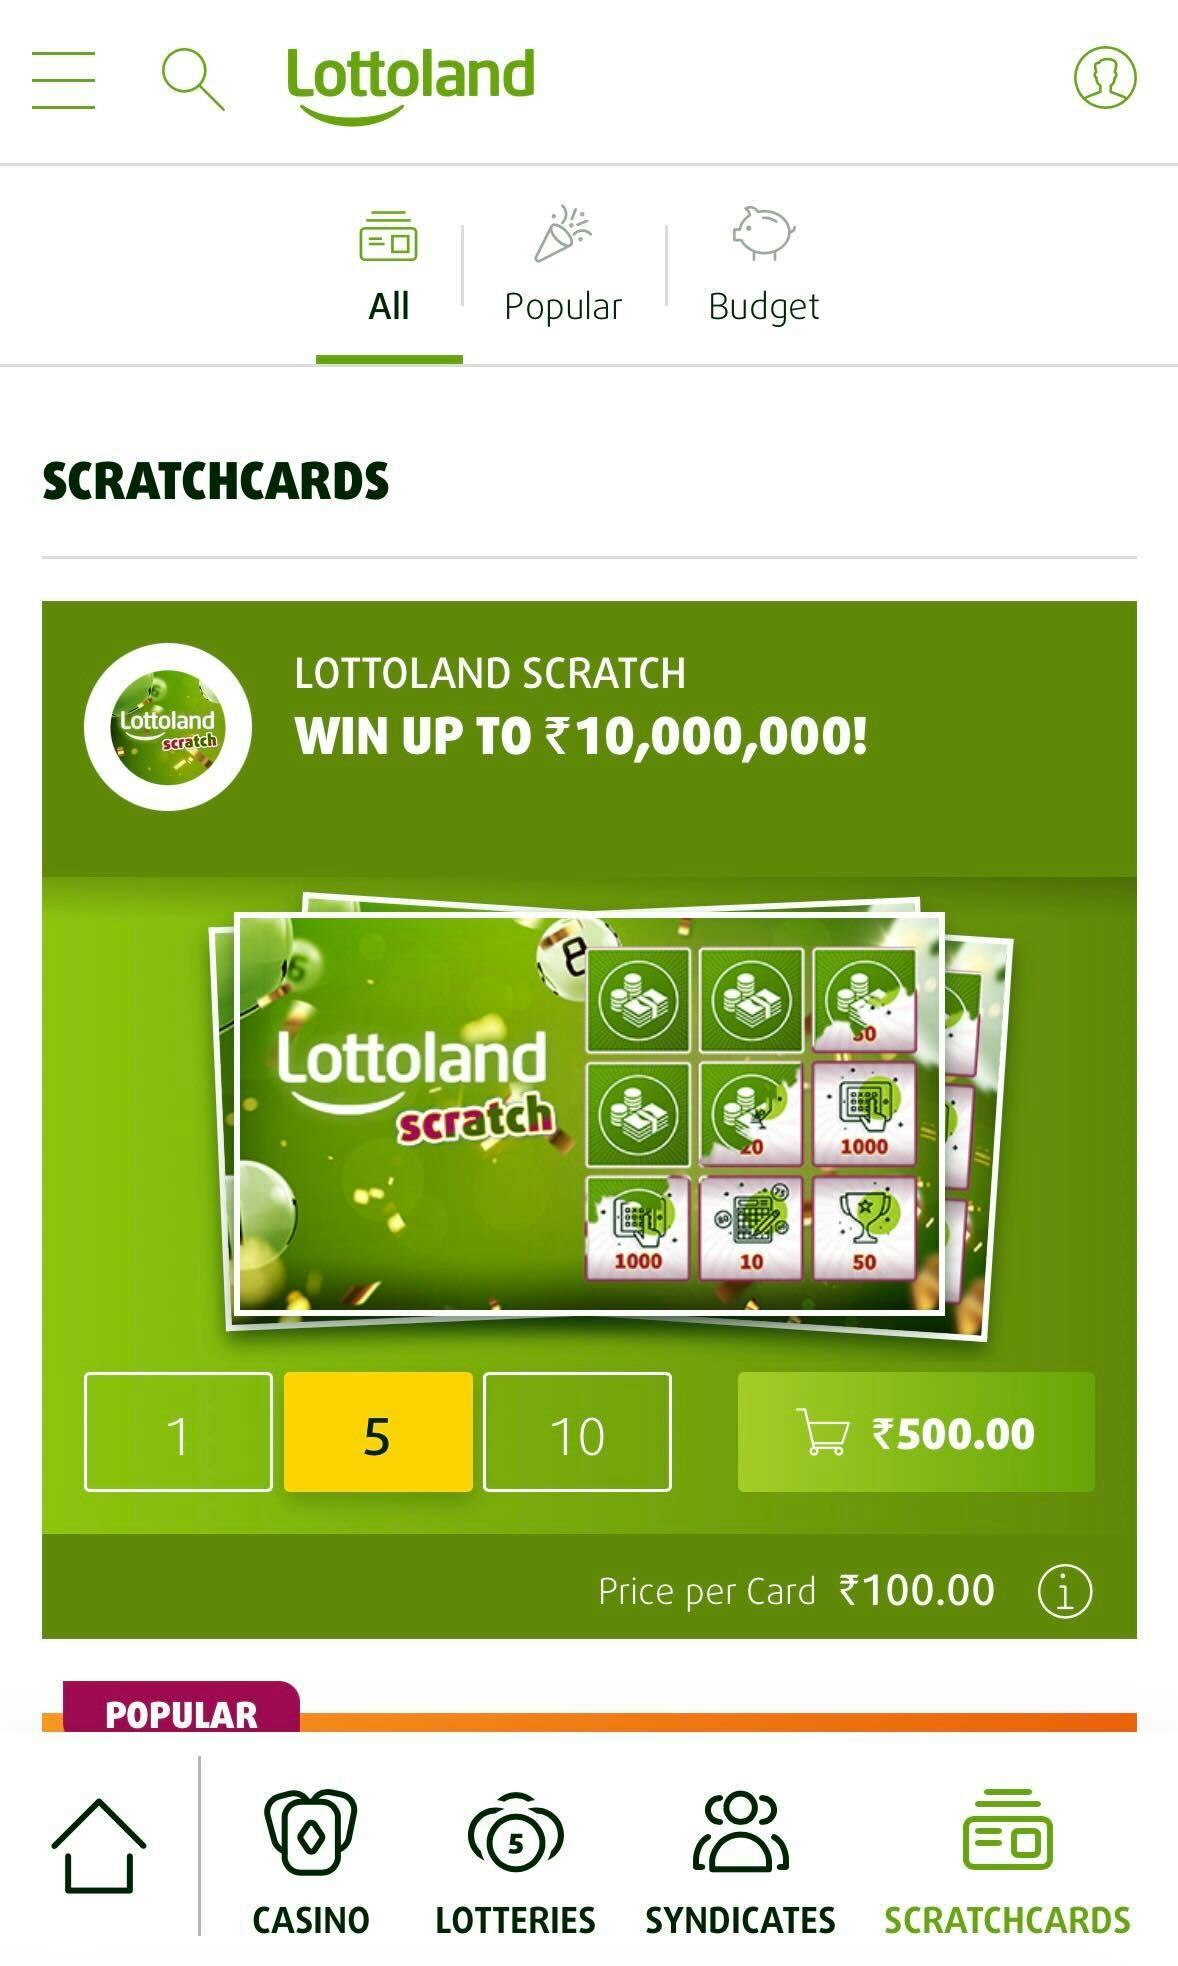 Lottoland app scratchcards page